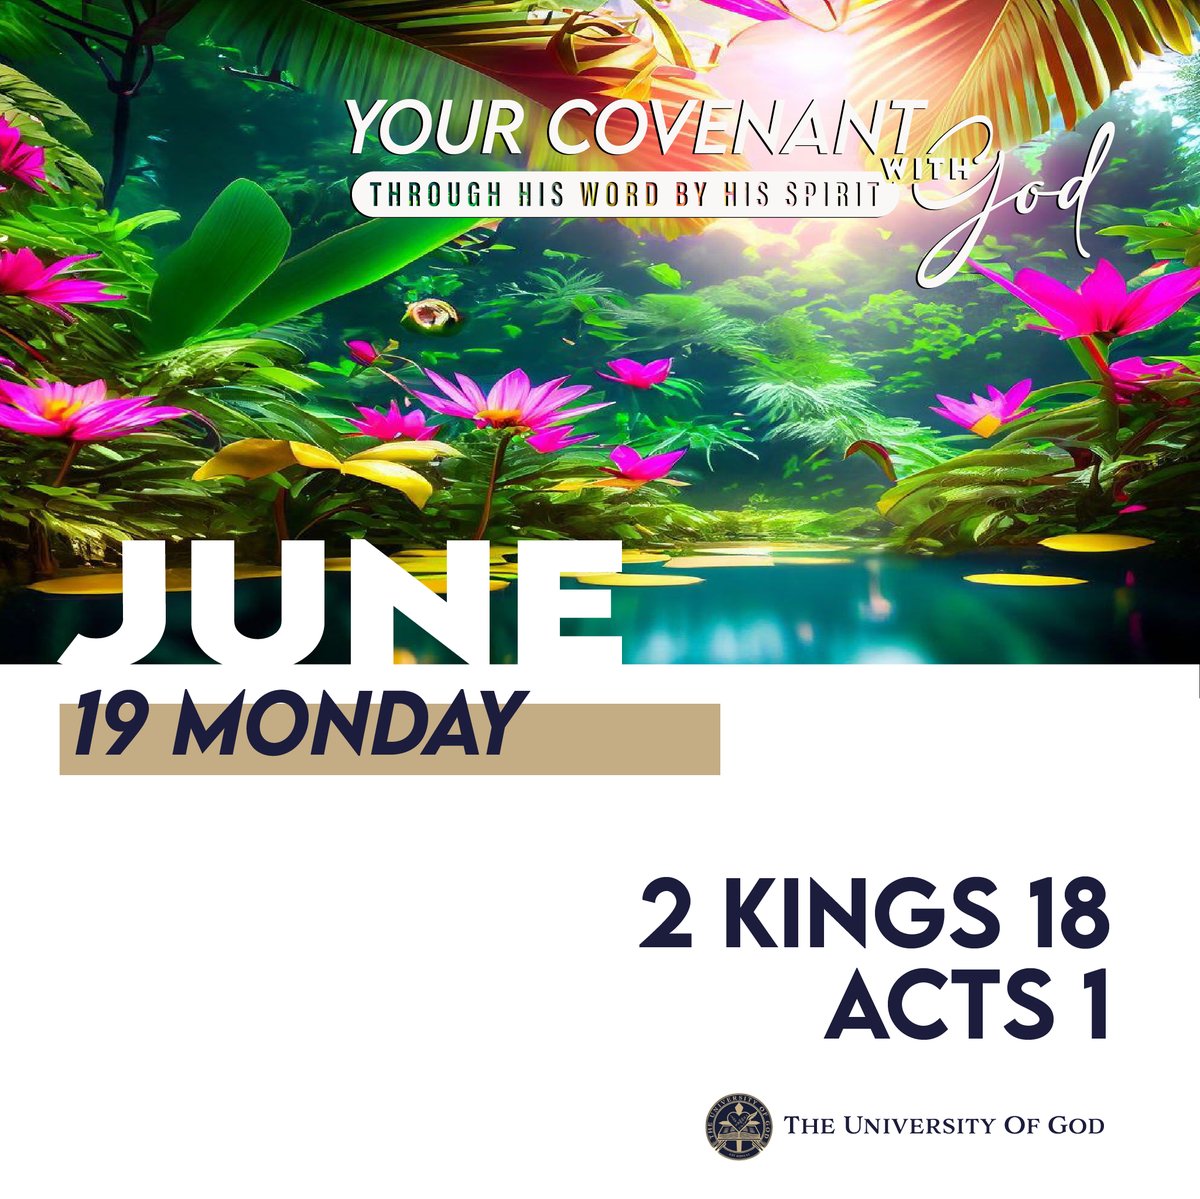 'An independent mind is a mind that is determined to find out the truth from God (1
Thessalonians 5:21).'

Download your daily reading plan for the year 2023: bit.ly/3TMgQCO
#CovenantWithGod #Week25 #UOG #Racine #Ruth